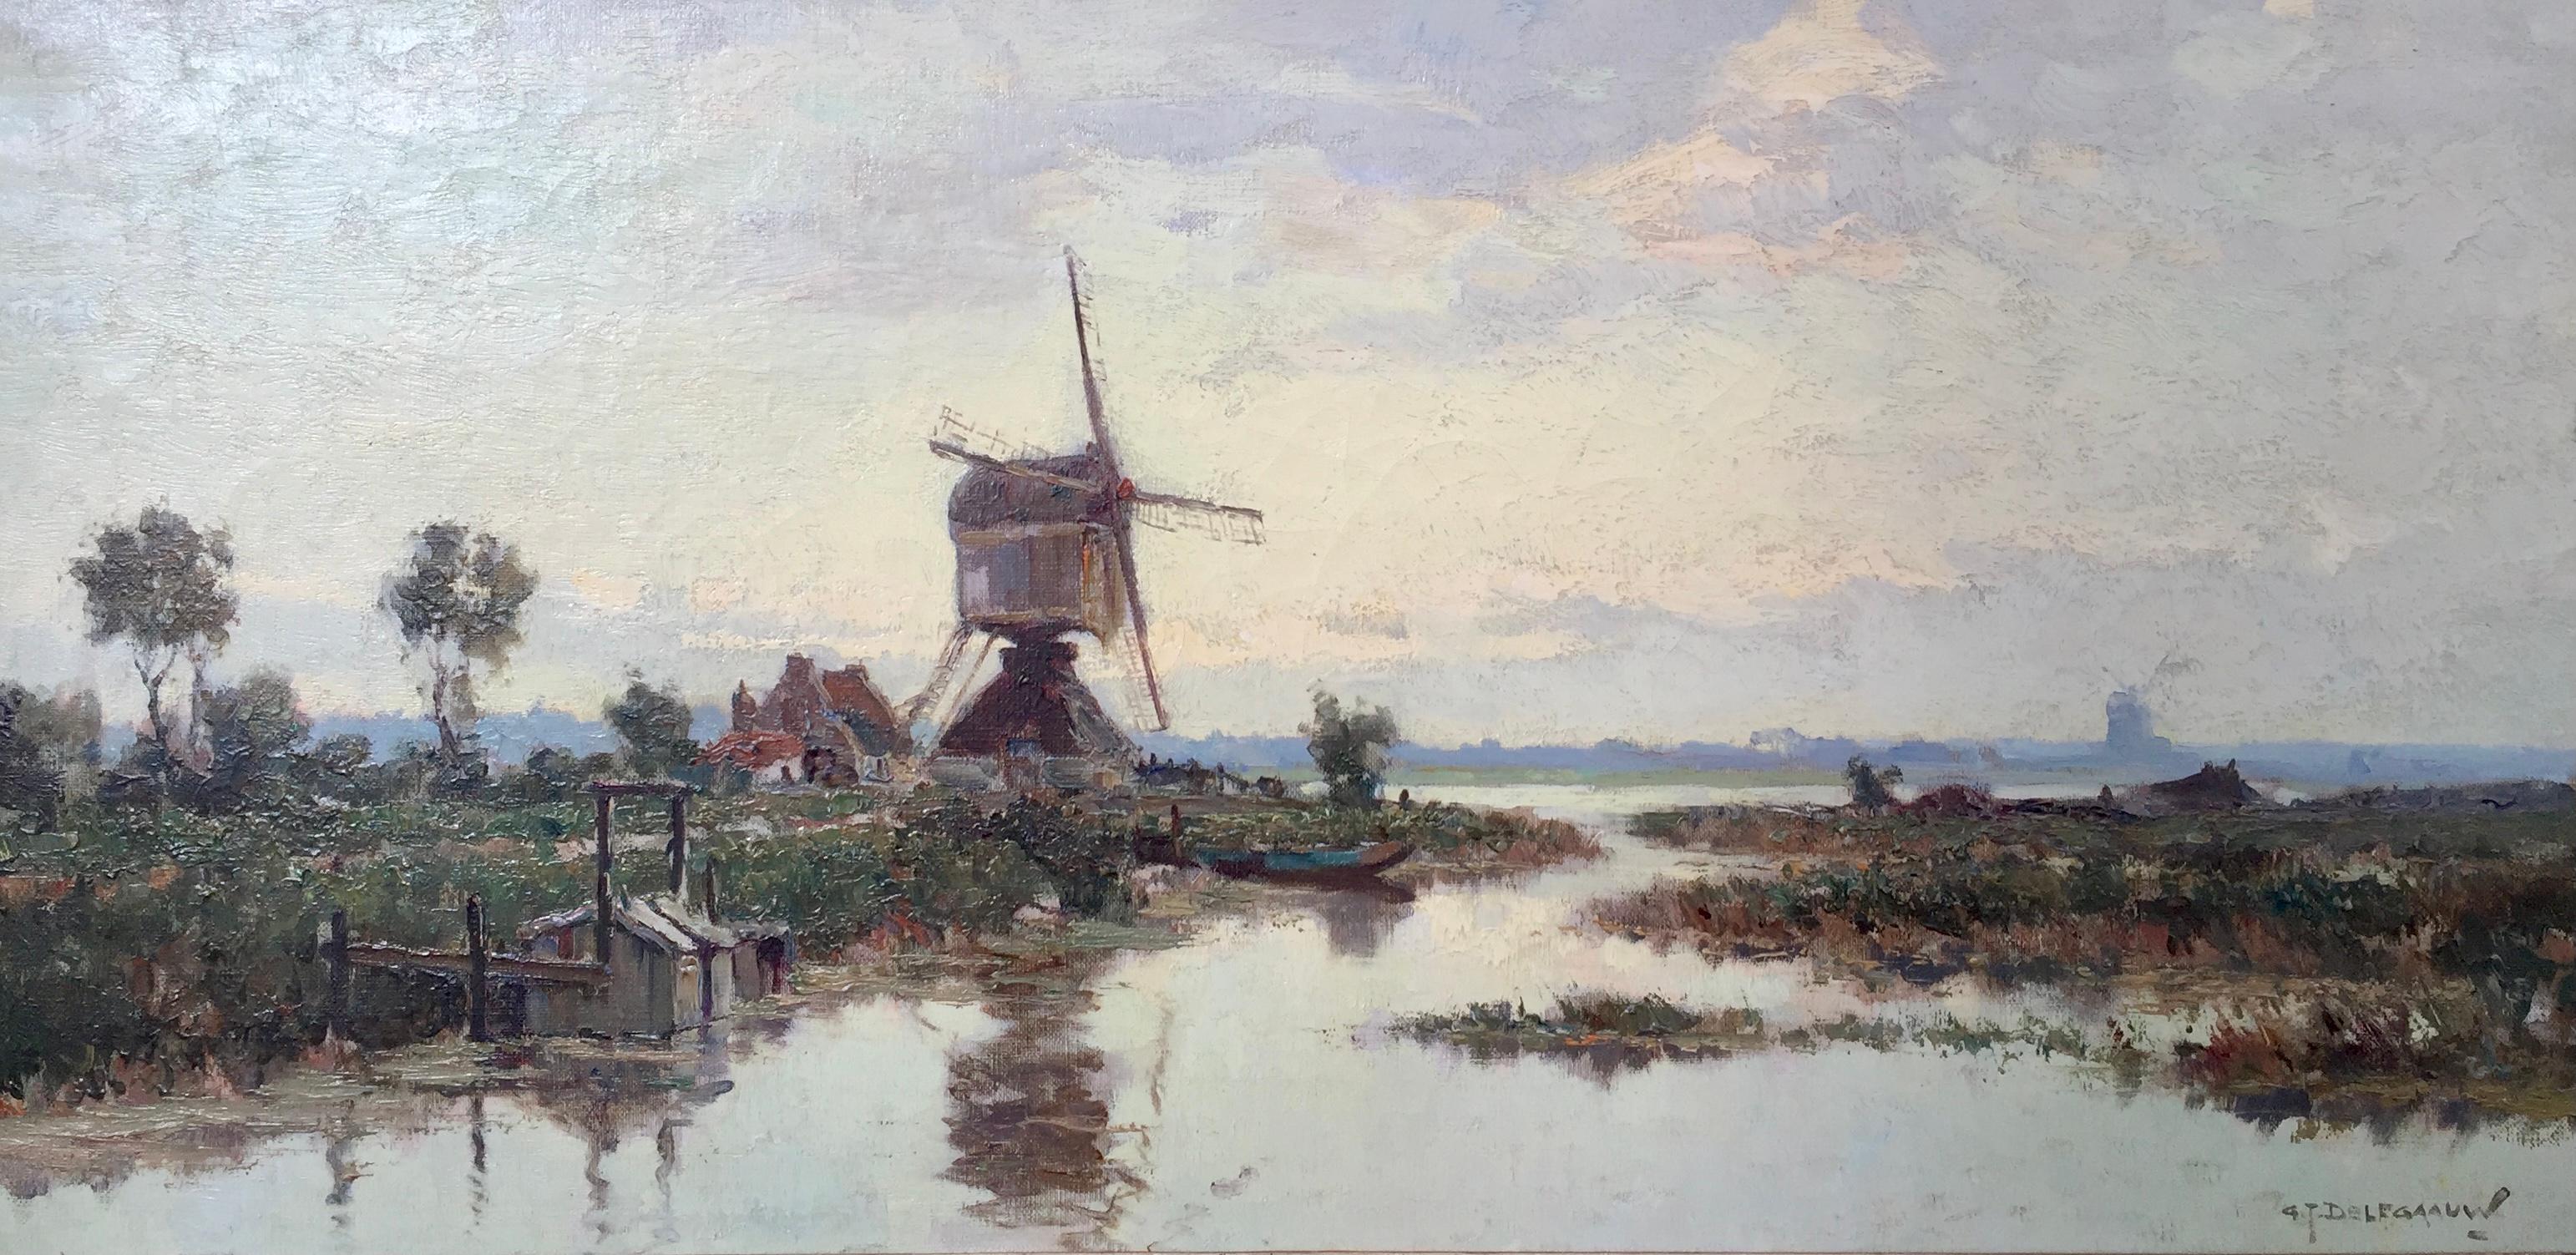 A Polder Landscape, Gerard Delfgaauw, Monster 1882 – 1947 The Hague, Netherlands - Painting by Delfgaauw Gerard